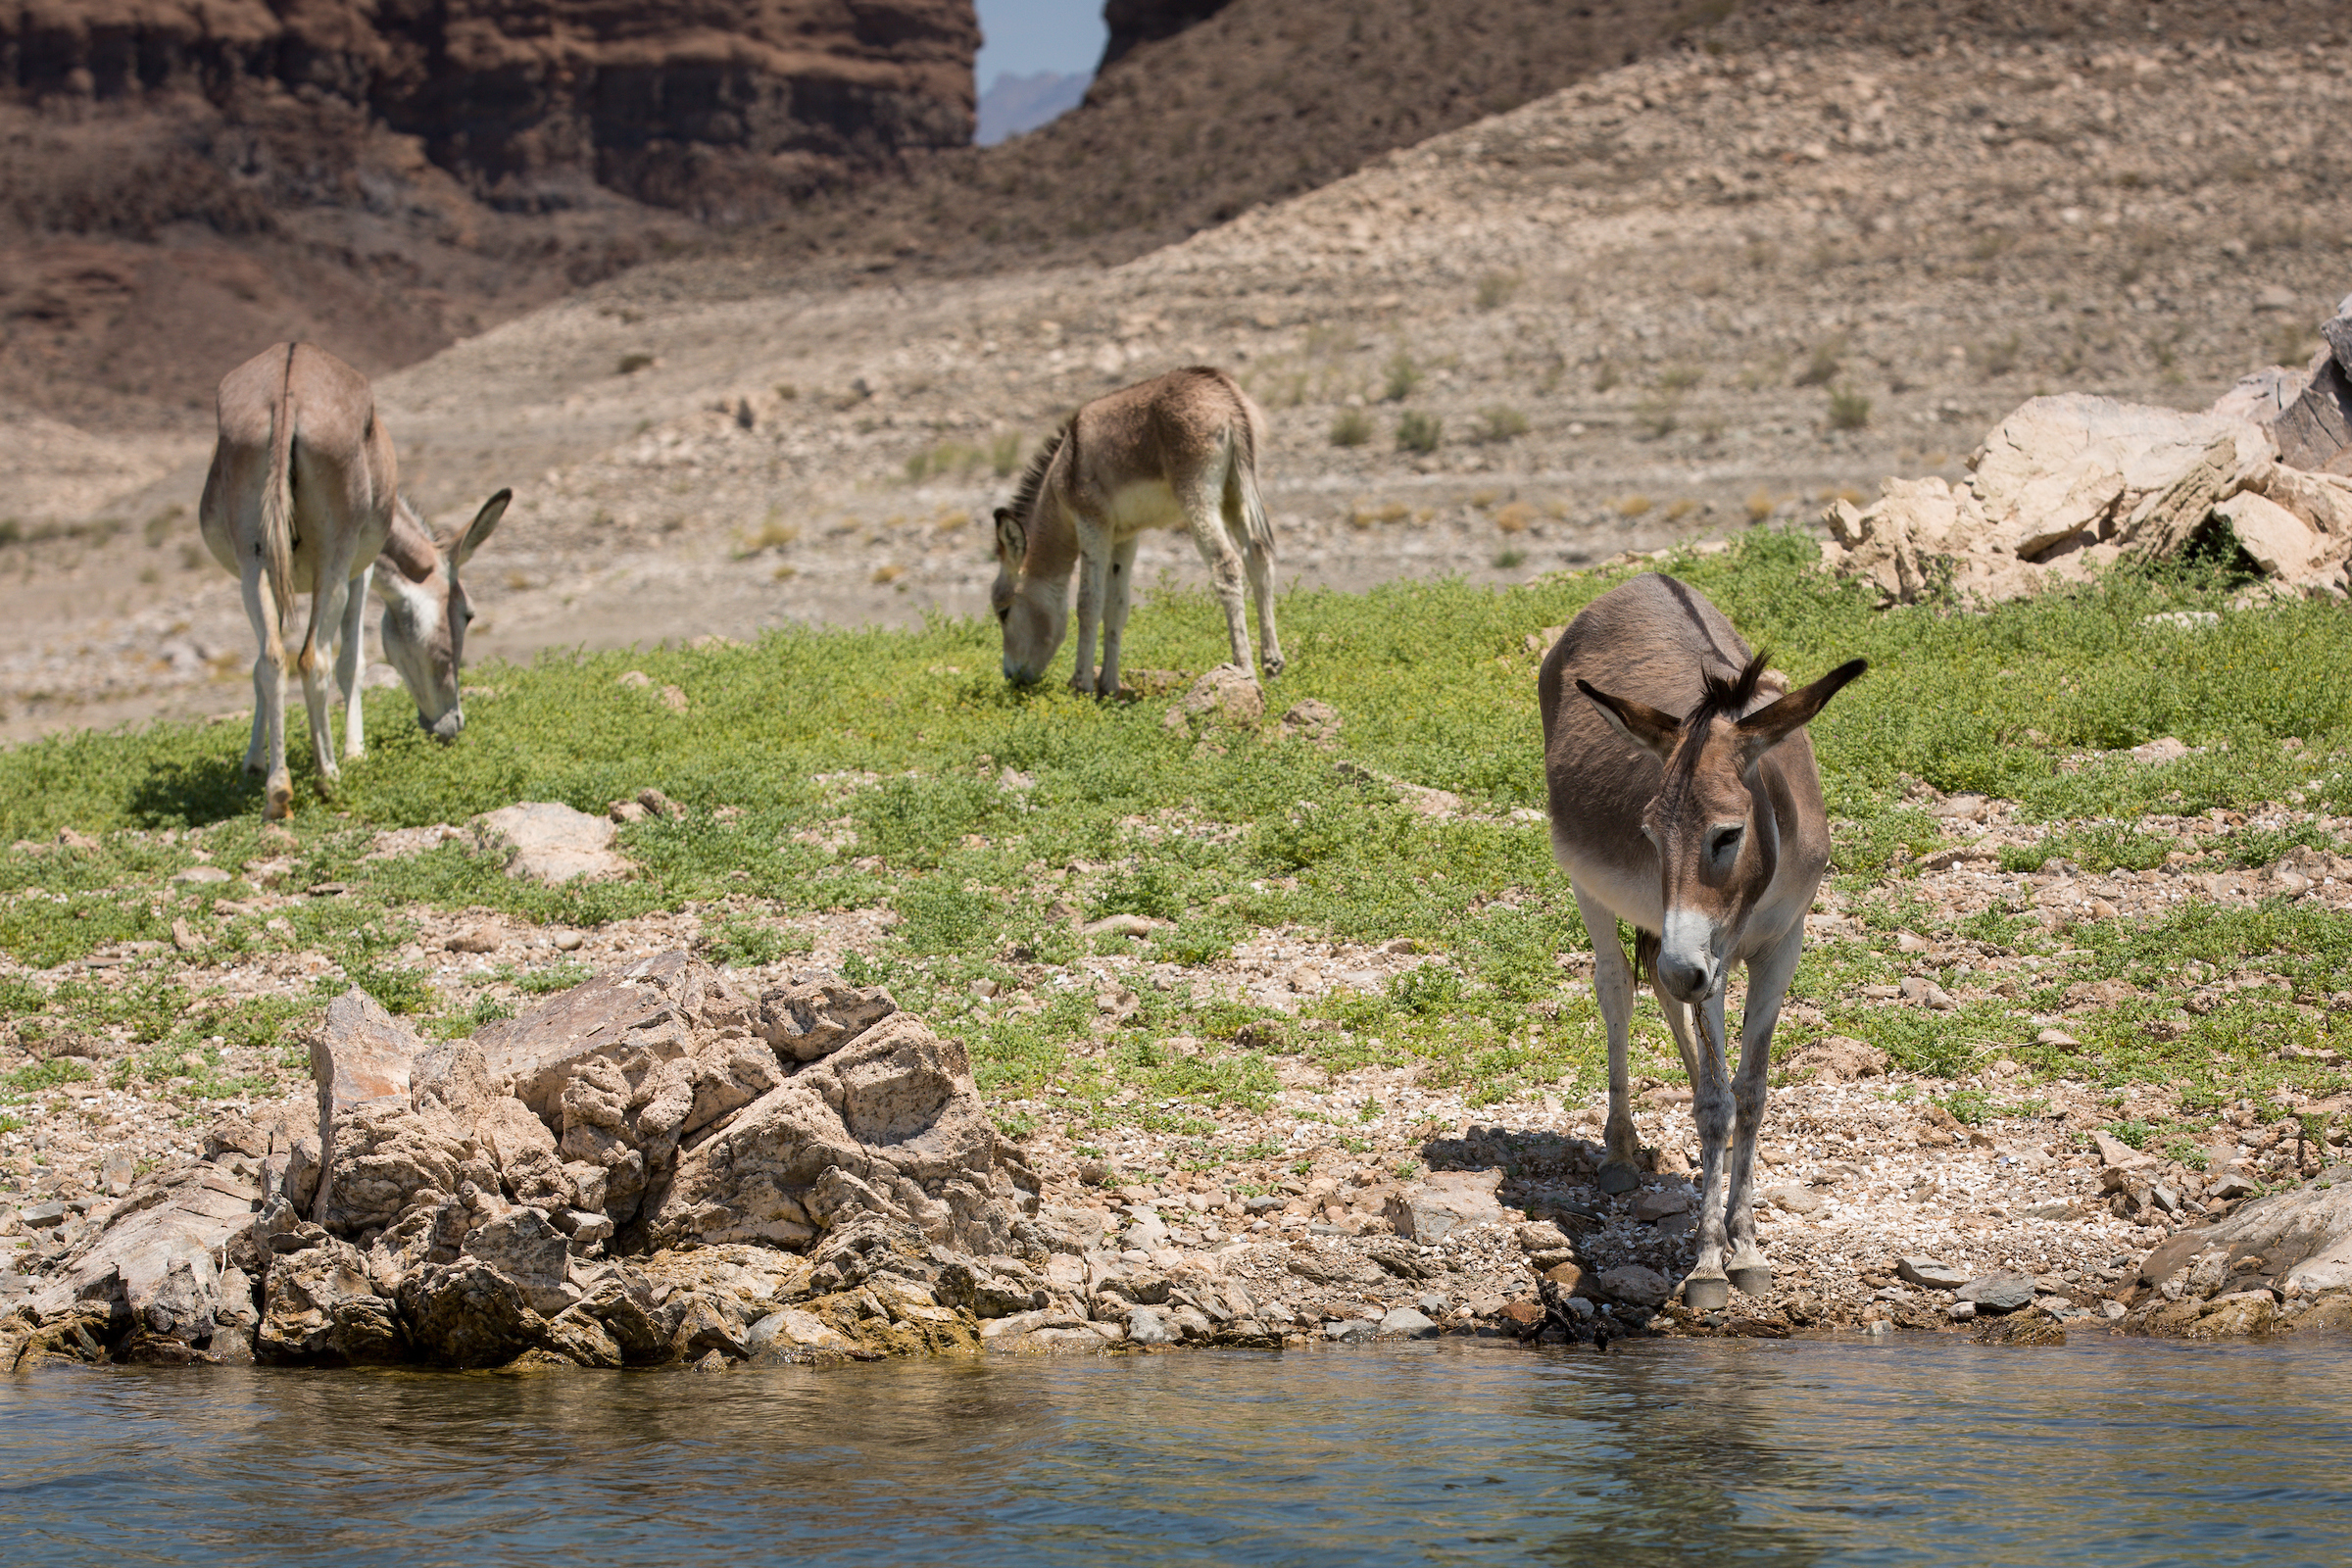 Wild burros drink from Lake Mead.